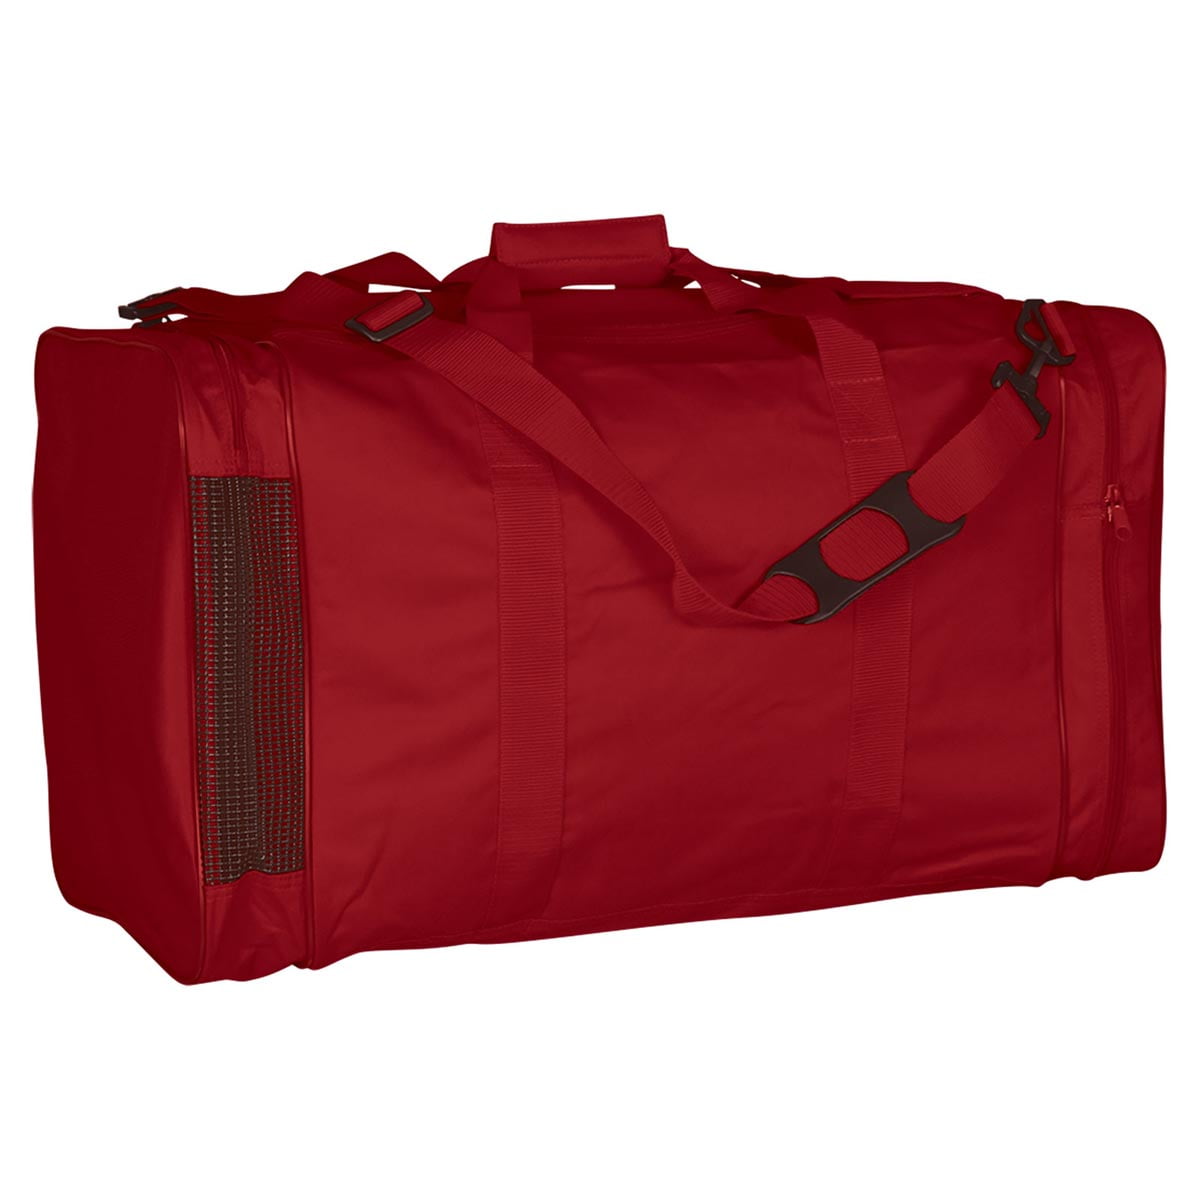 Blank Team Sports Bag 600D Polyester Red and Black Ready for Embroider FAST SHIP 